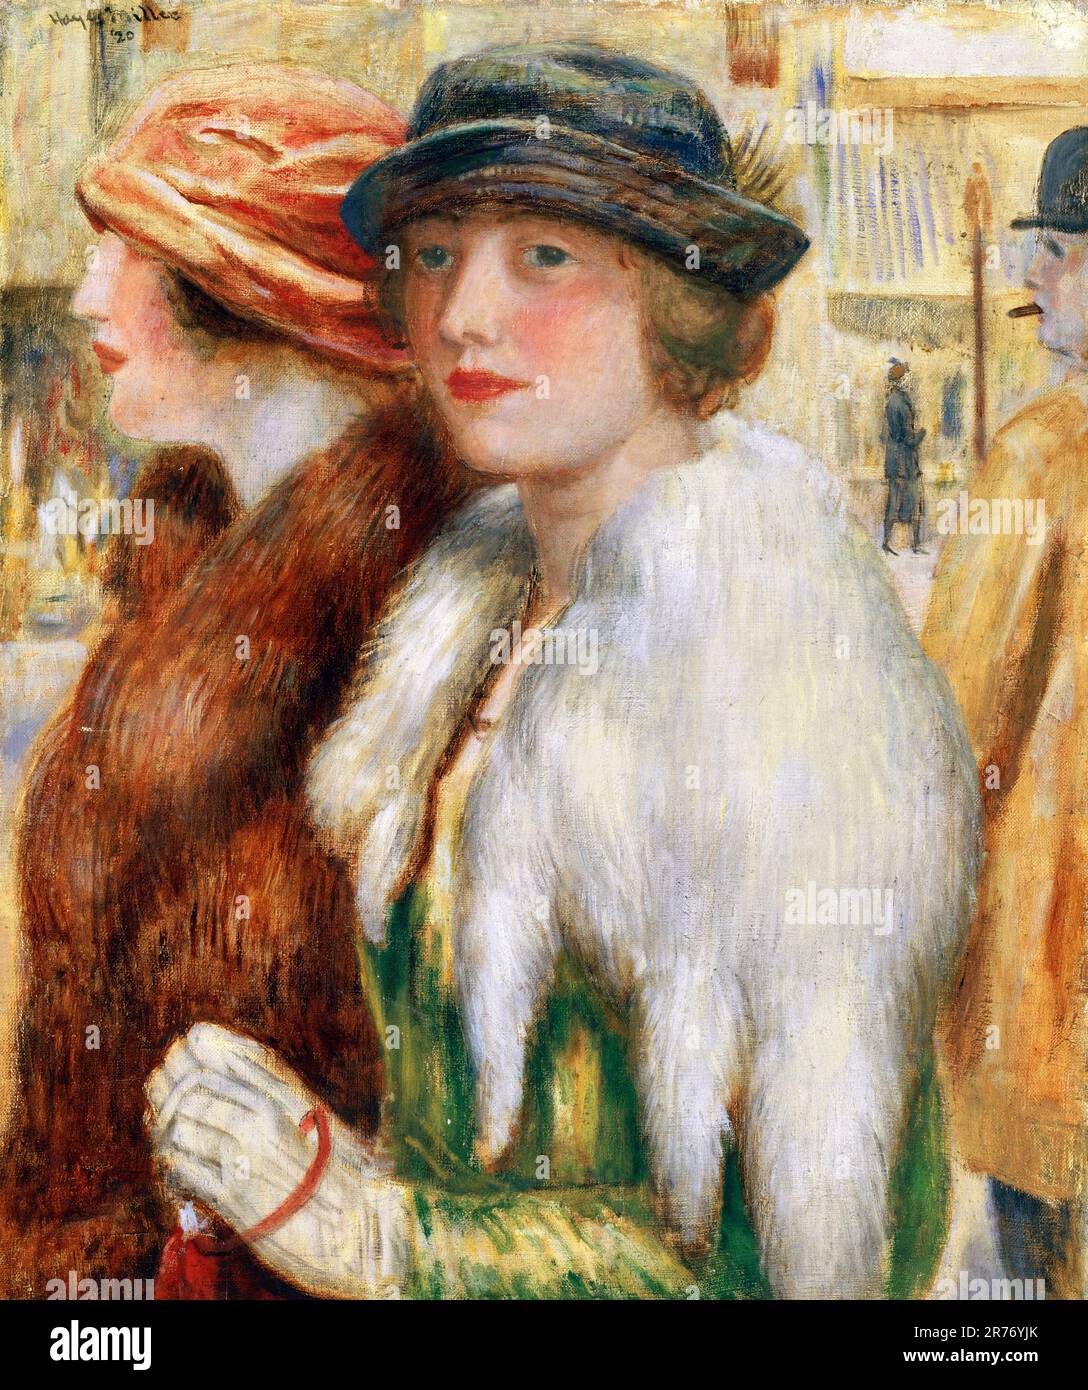 Kenneth Hayes Miller. The Shoppers vom amerikanischen Künstler Kenneth Hayes Miller (1876-1952), 1920 Stockfoto